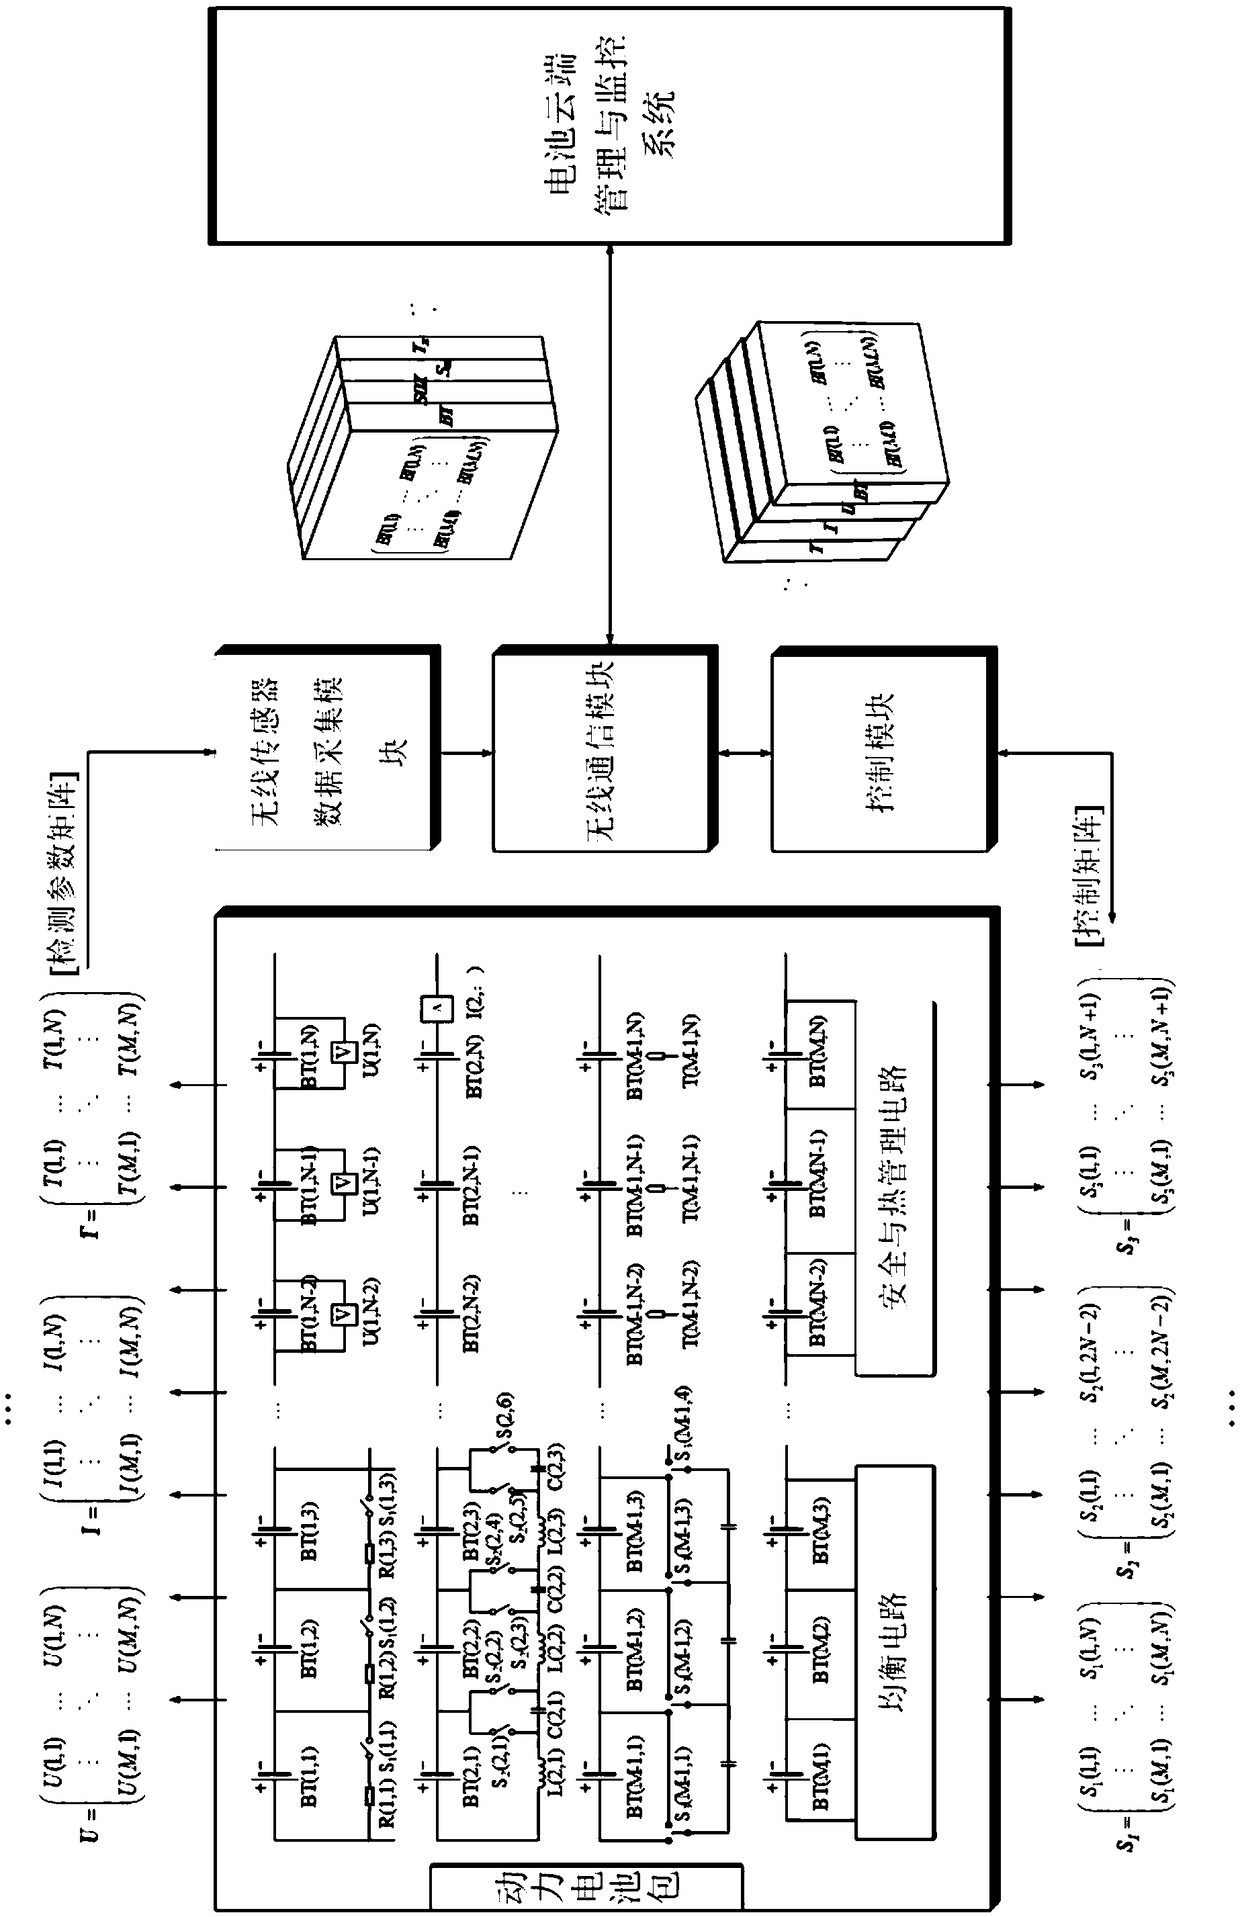 Electric automobile power battery management and monitoring system based on cloud computing